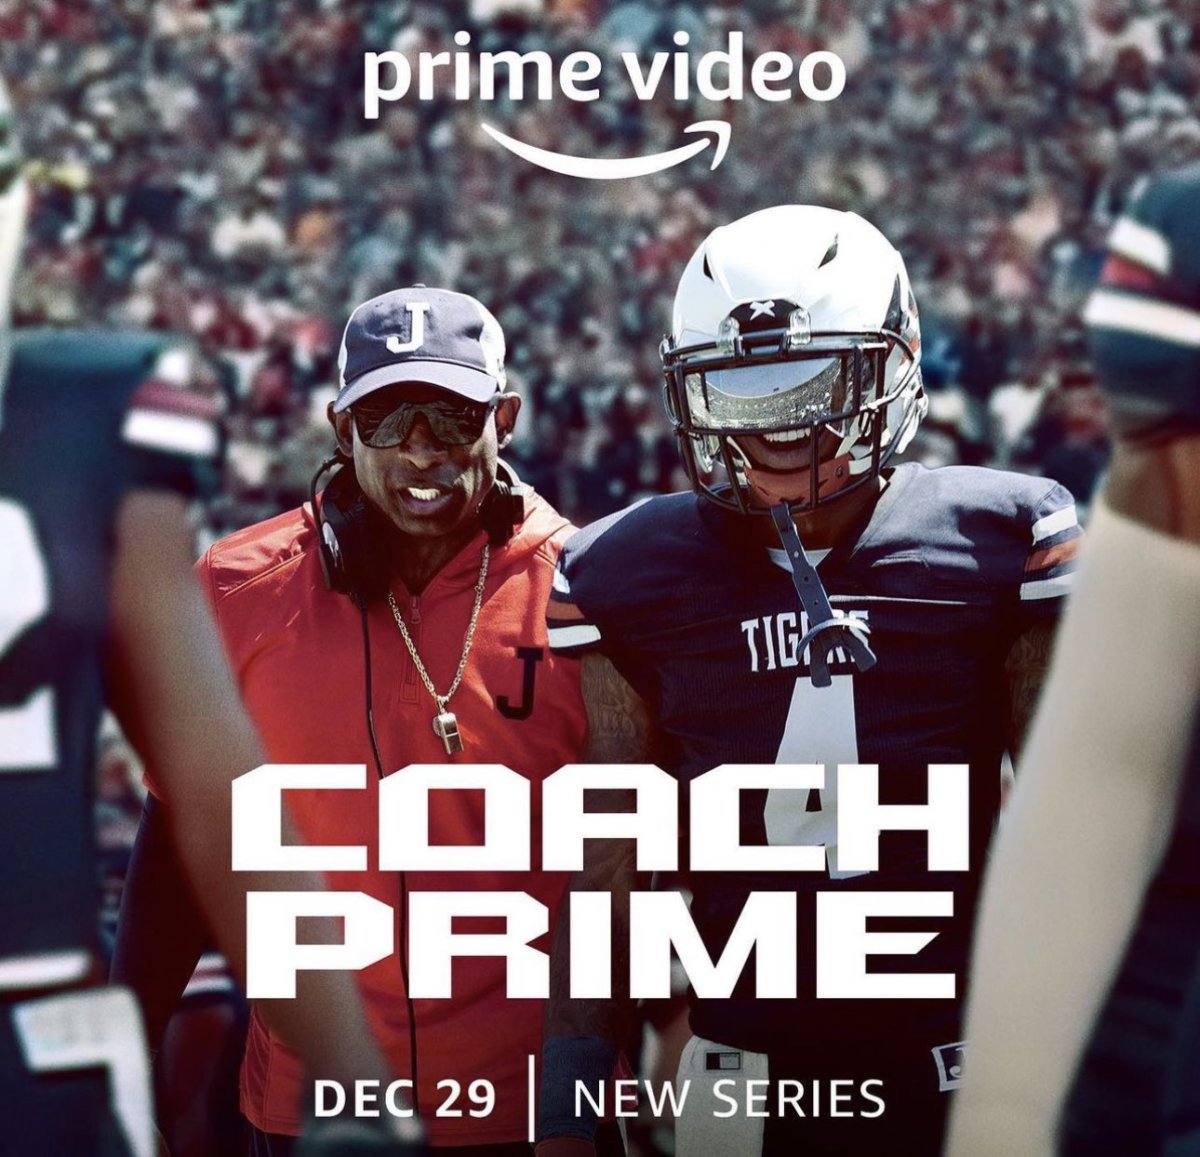 Discussing 'Before Prime and After Prime,' Deion Sanders sheds insight on  verbal dust-up with Nick Saban over NIL in new Amazon series - Footballscoop